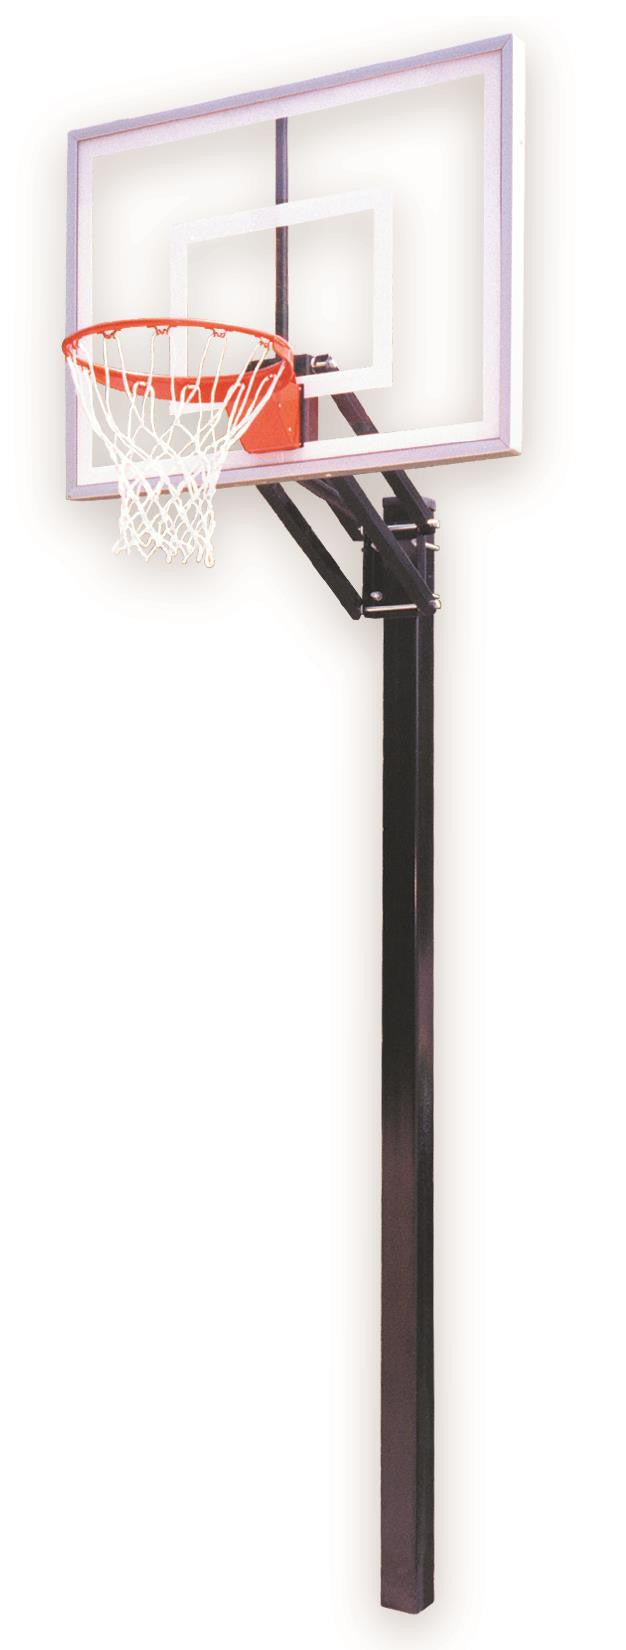 First Team Champ II In Ground Outdoor Adjustable Basketball Hoop 48 inch Acrylic